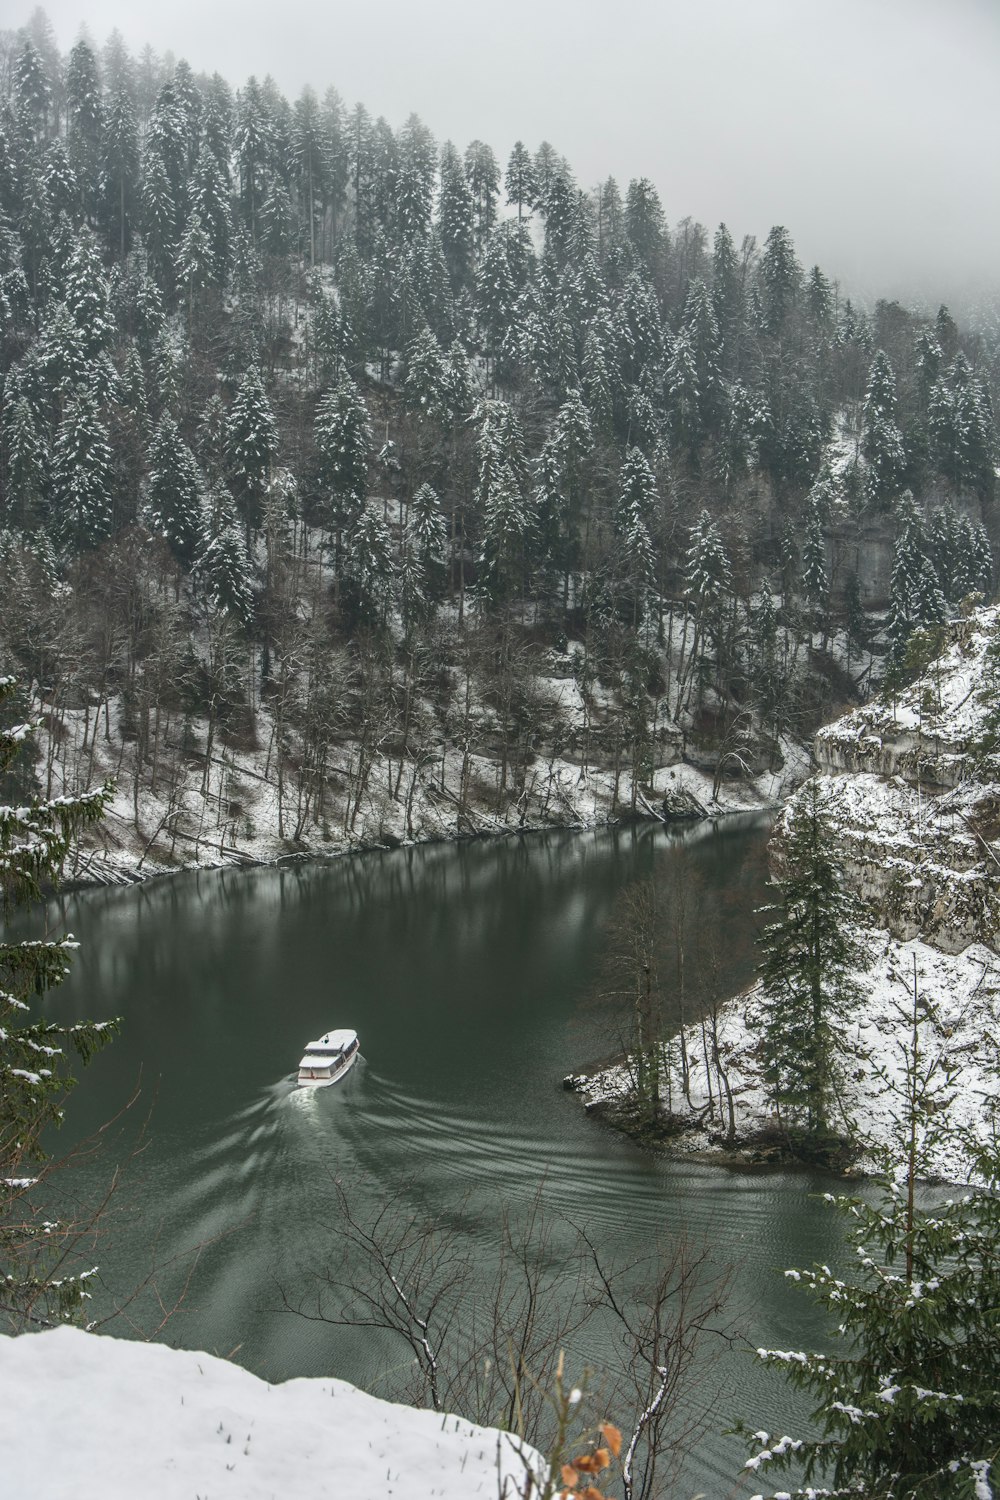 a boat is in the water surrounded by snow